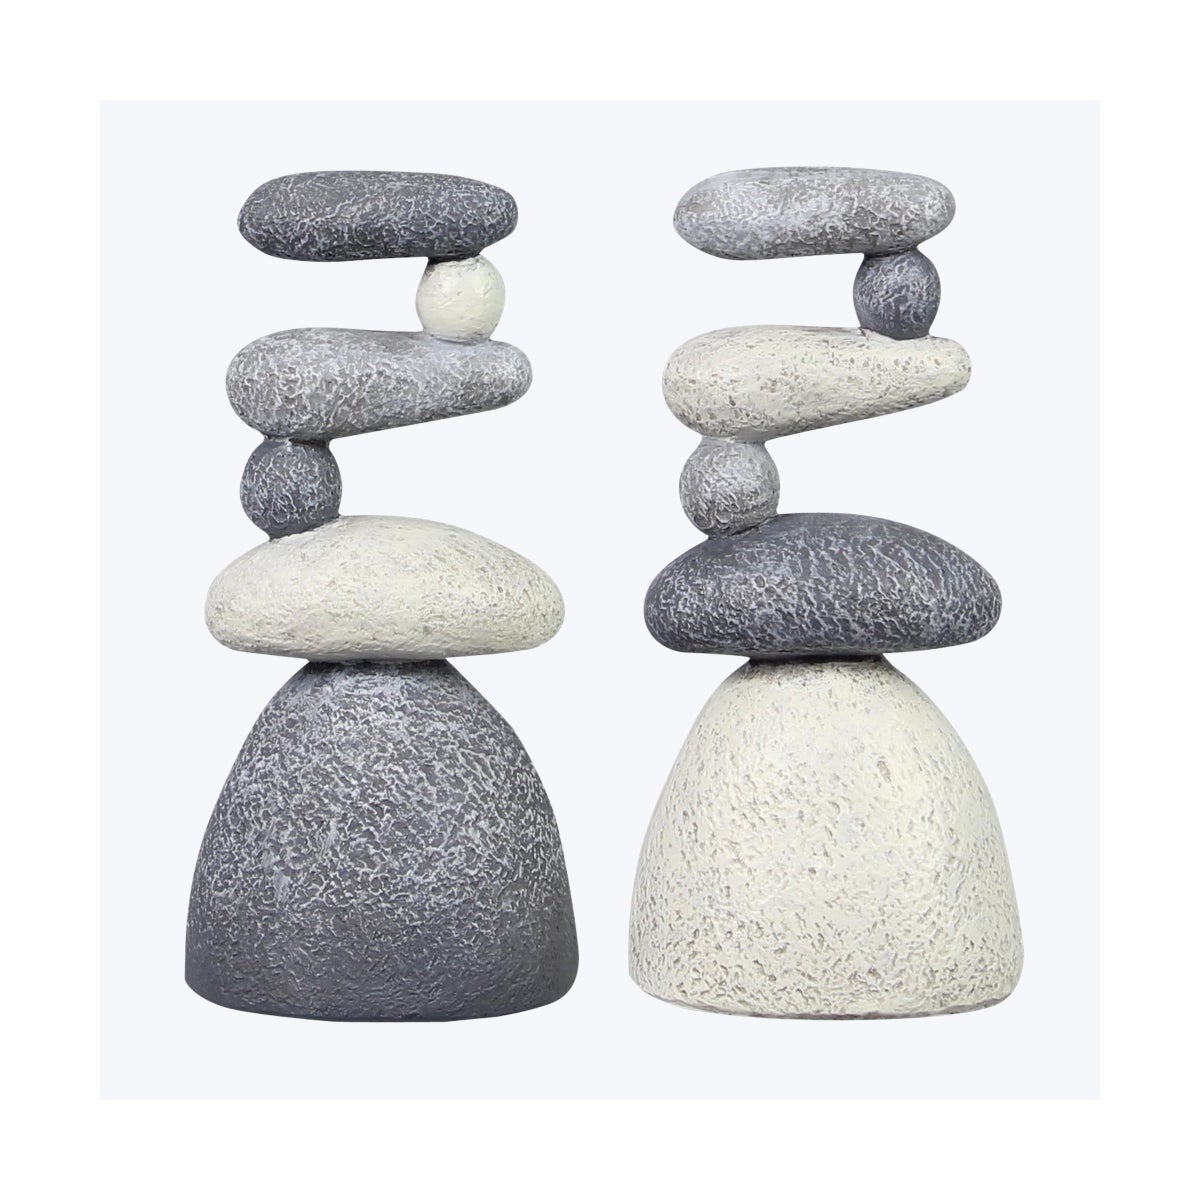 Resin Stacked Wellness Rocks, 2 Assorted